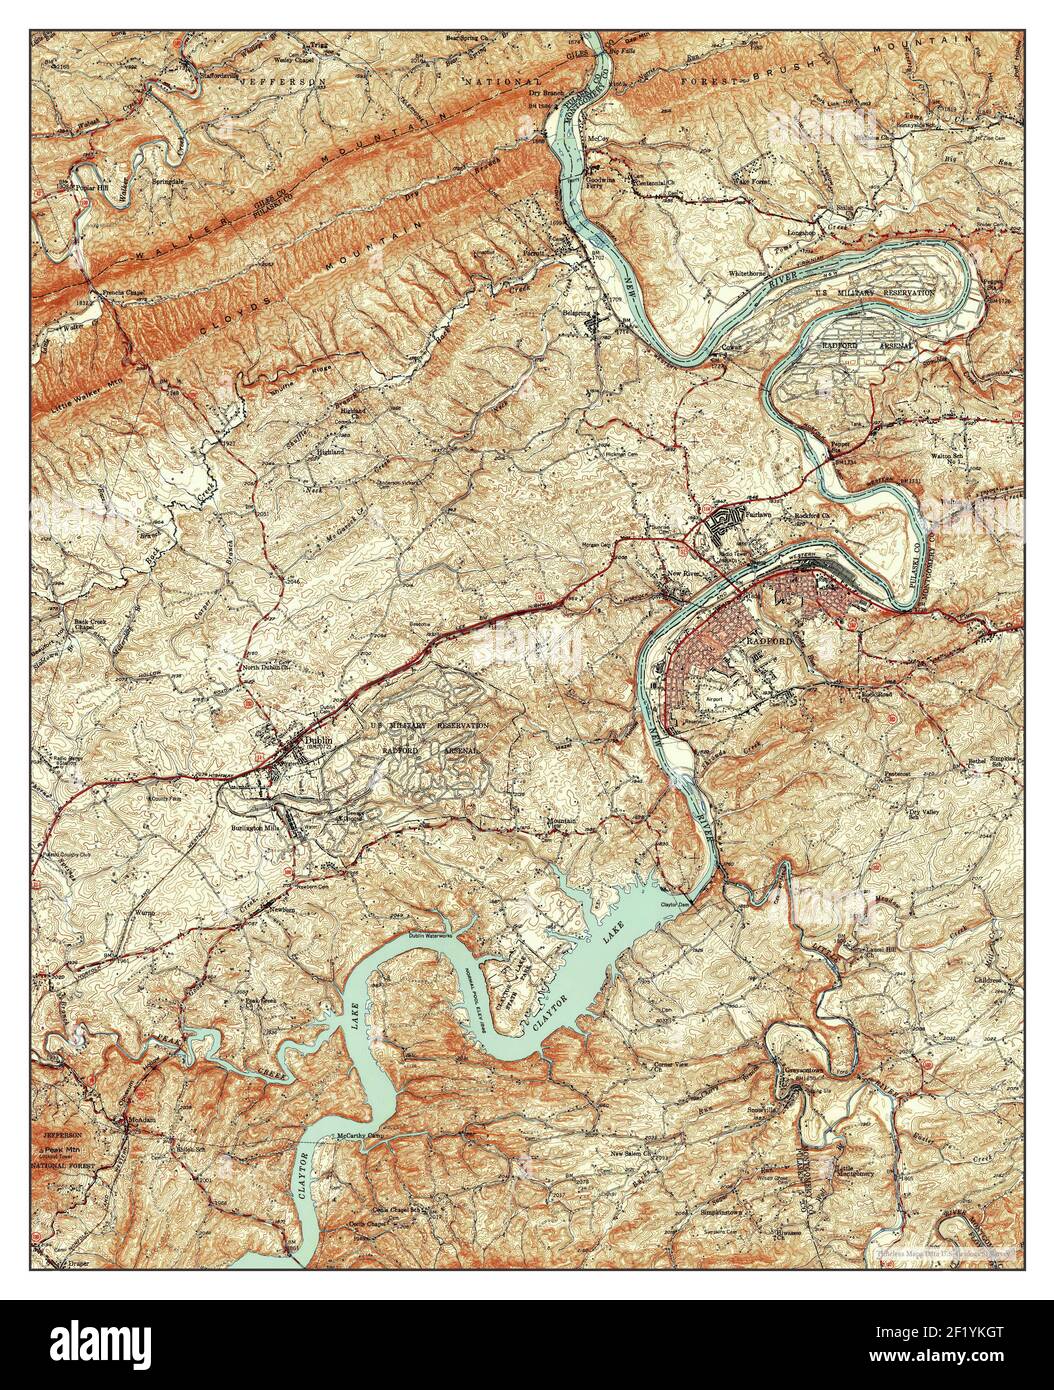 Radford, Virginia, map 1950, 1:62500, United States of America by Timeless Maps, data U.S. Geological Survey Stock Photo